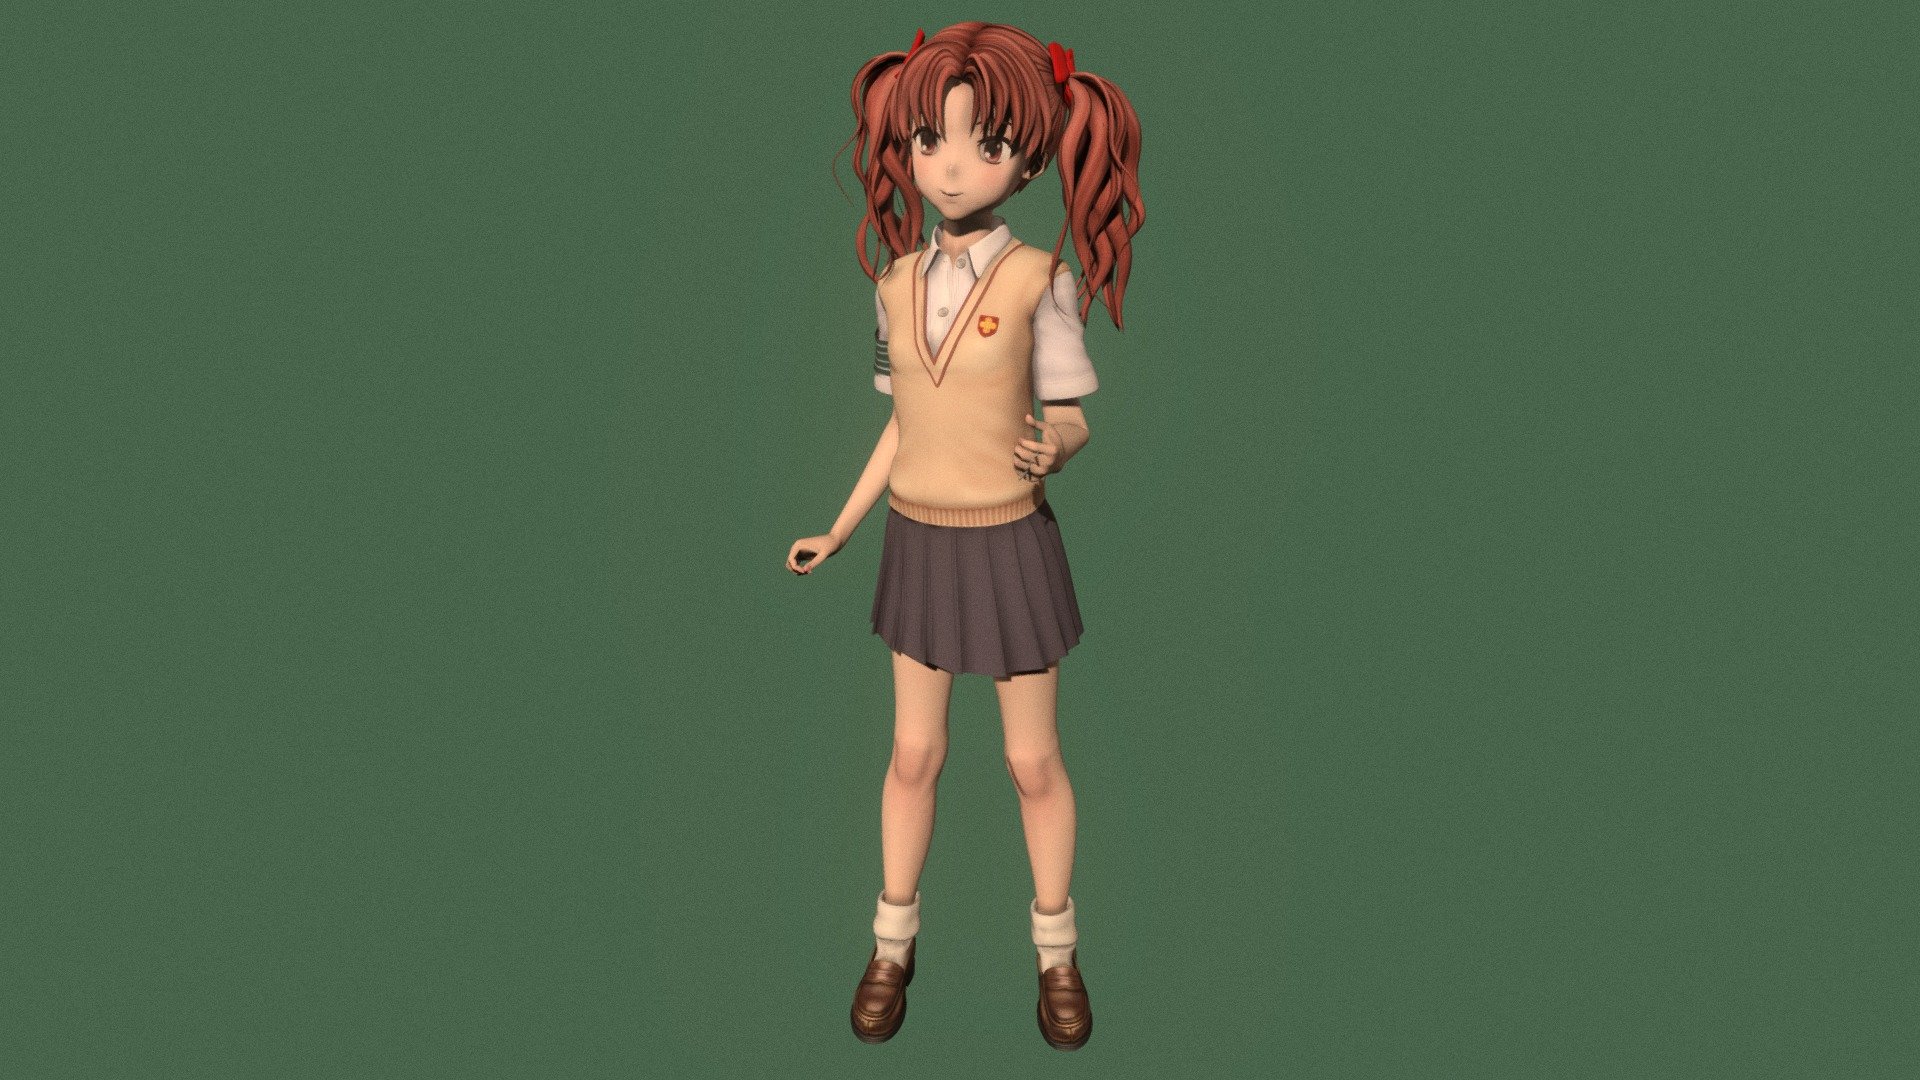 Posed model of anime girl Kuroko Shirai (A Certain Scientific Railgun).

This product include .FBX (ver. 7200) and .MAX (ver. 2010) files.

Rigged version: https://sketchfab.com/3d-models/t-pose-rigged-model-of-kuroko-shirai-f87cddd7fa61409ebf2182e450765ca4

I support convert this 3D model to various file formats: 3DS; AI; ASE; DAE; DWF; DWG; DXF; FLT; HTR; IGS; M3G; MQO; OBJ; SAT; STL; W3D; WRL; X.

You can buy all of my models in one pack to save cost: https://sketchfab.com/3d-models/all-of-my-anime-girls-c5a56156994e4193b9e8fa21a3b8360b

And I can make commission models.

If you have any questions, please leave a comment or contact me via my email 3d.eden.project@gmail.com 3d model